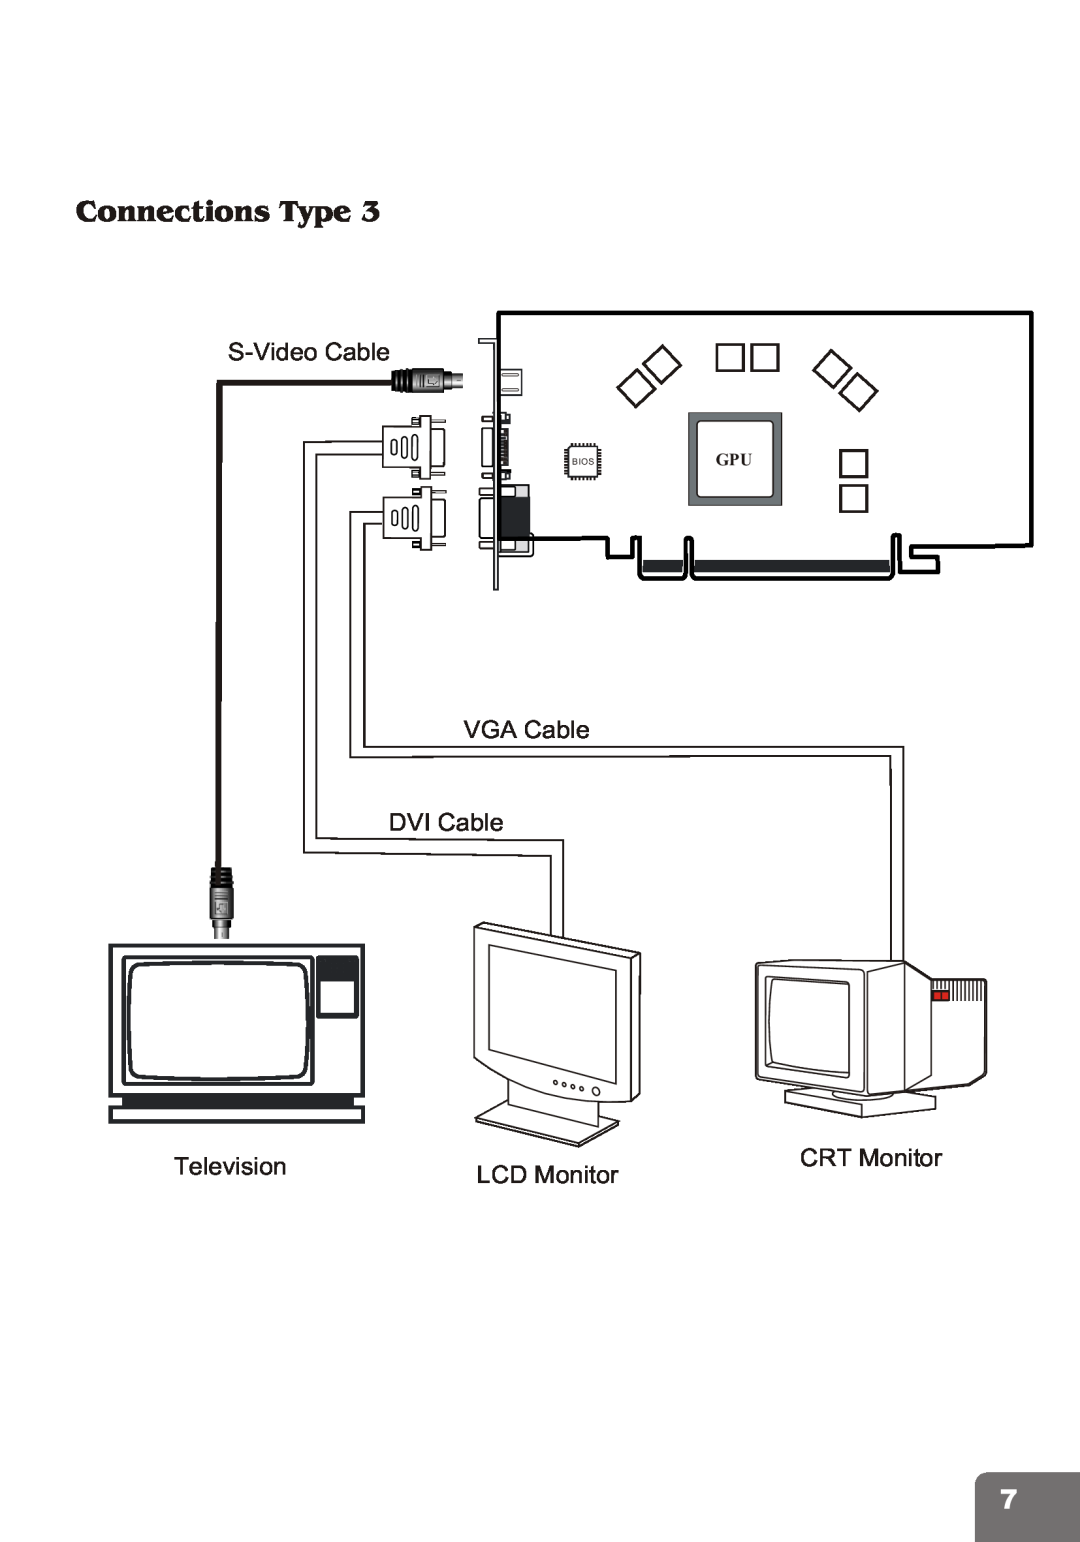 Nvidia PCI Express Series Connections Type, S-Video Cable, VGA Cable DVI Cable, Television, CRT Monitor, LCD Monitor, Bios 